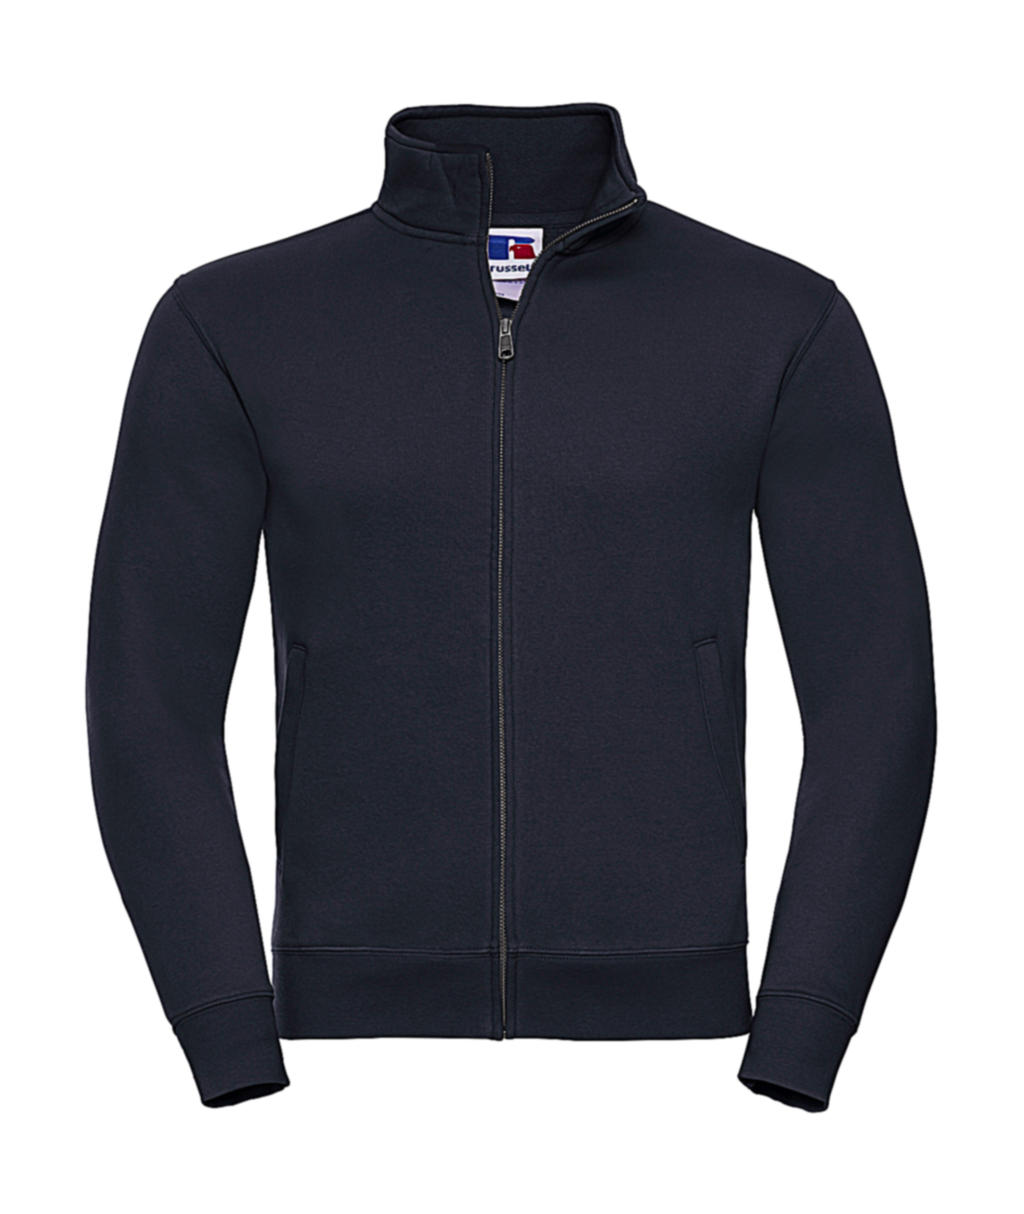  Mens Authentic Sweat Jacket in Farbe French Navy